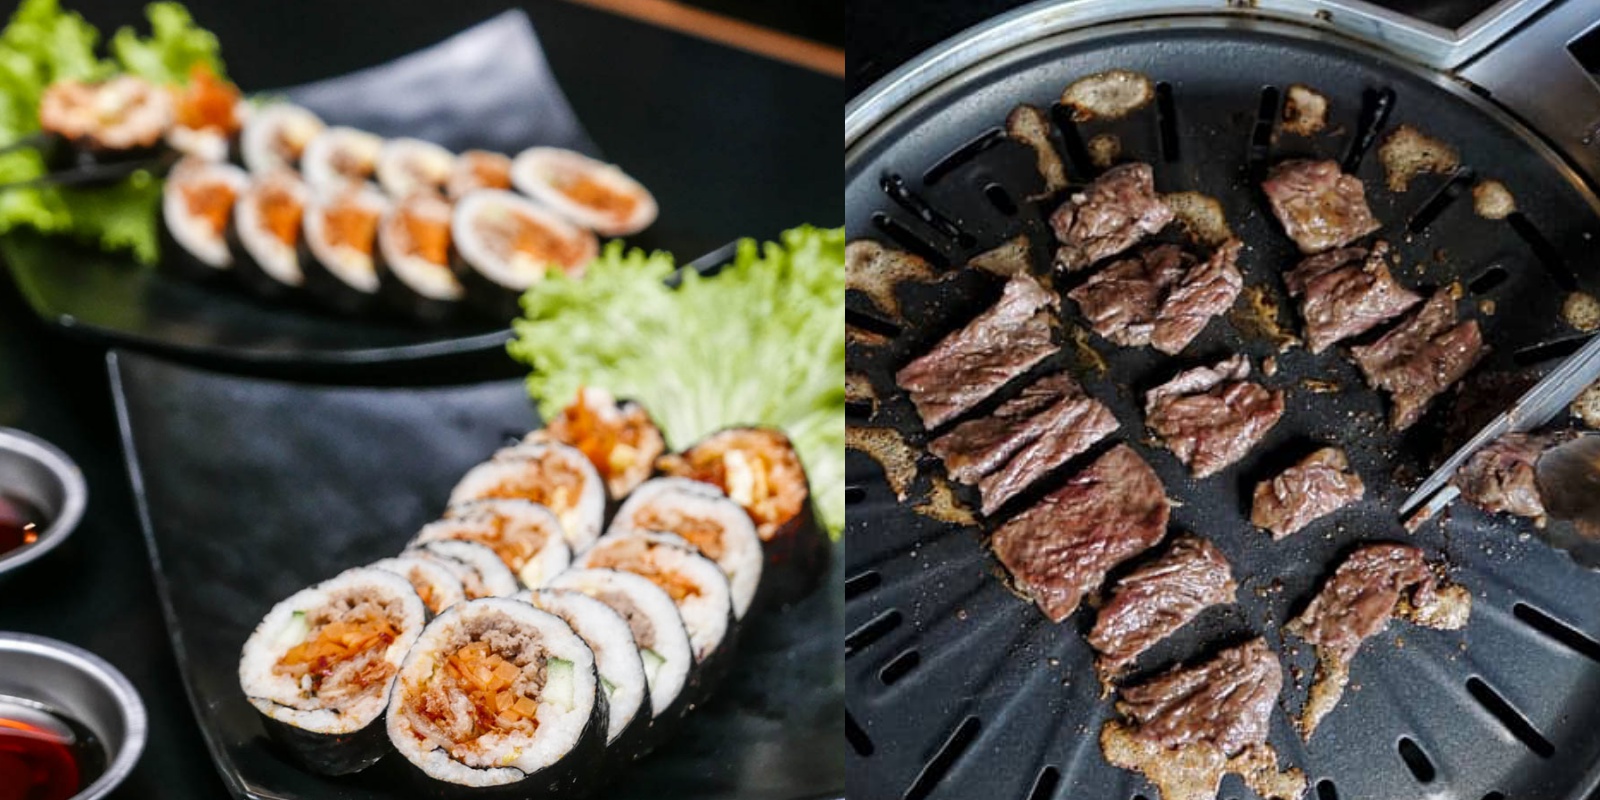 Exclusive: Gorge yourself with Gimbap at Soban K-Town Grill